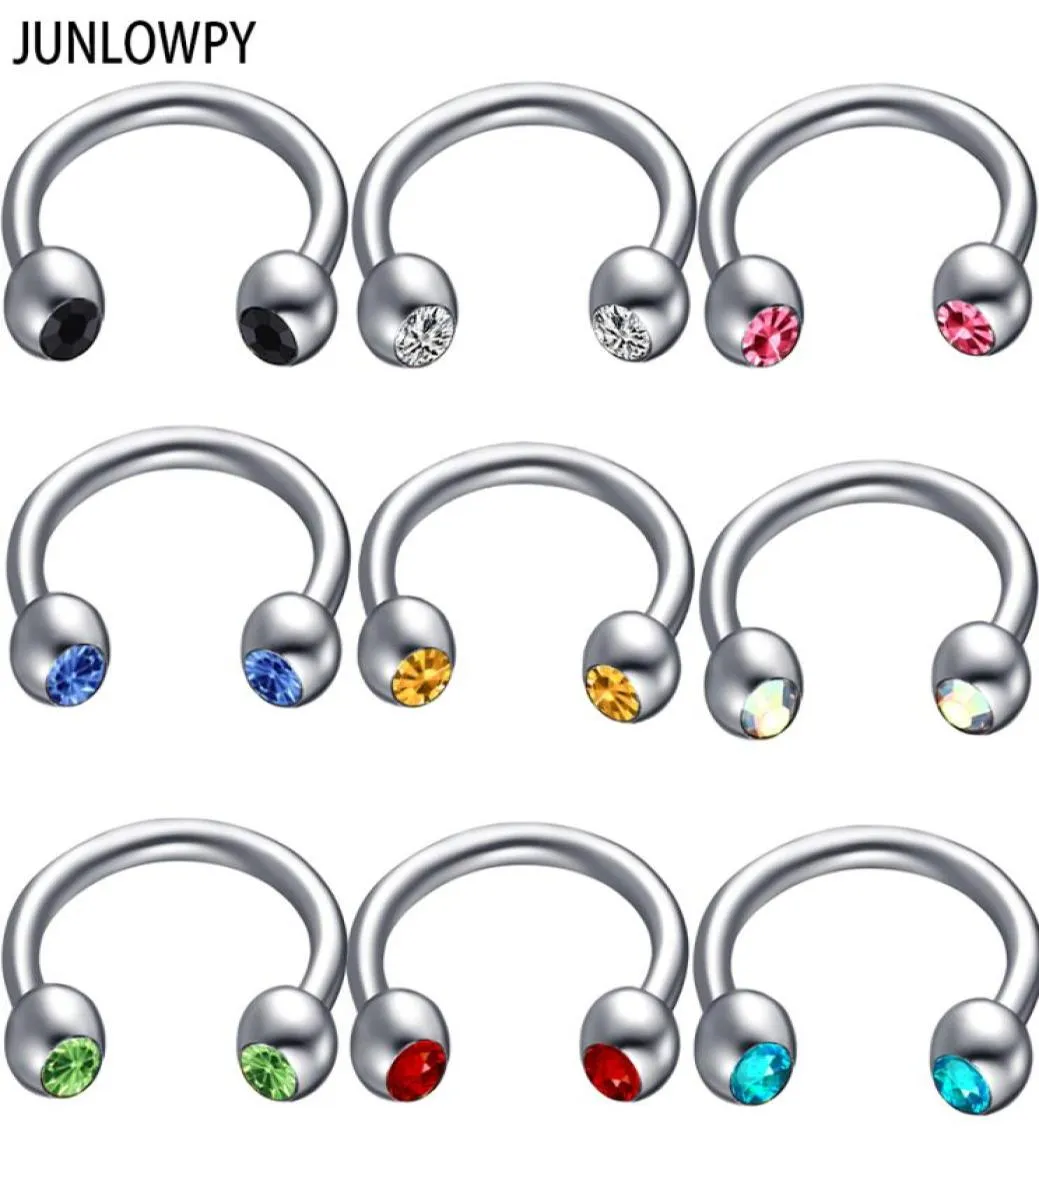 mix 614mm Silver Septum Gem Eyebrow Piercing 100pcslot with 10 color Body Piercing 16G Nose Hoop Tragus Ear Body Jewelry Men7258015